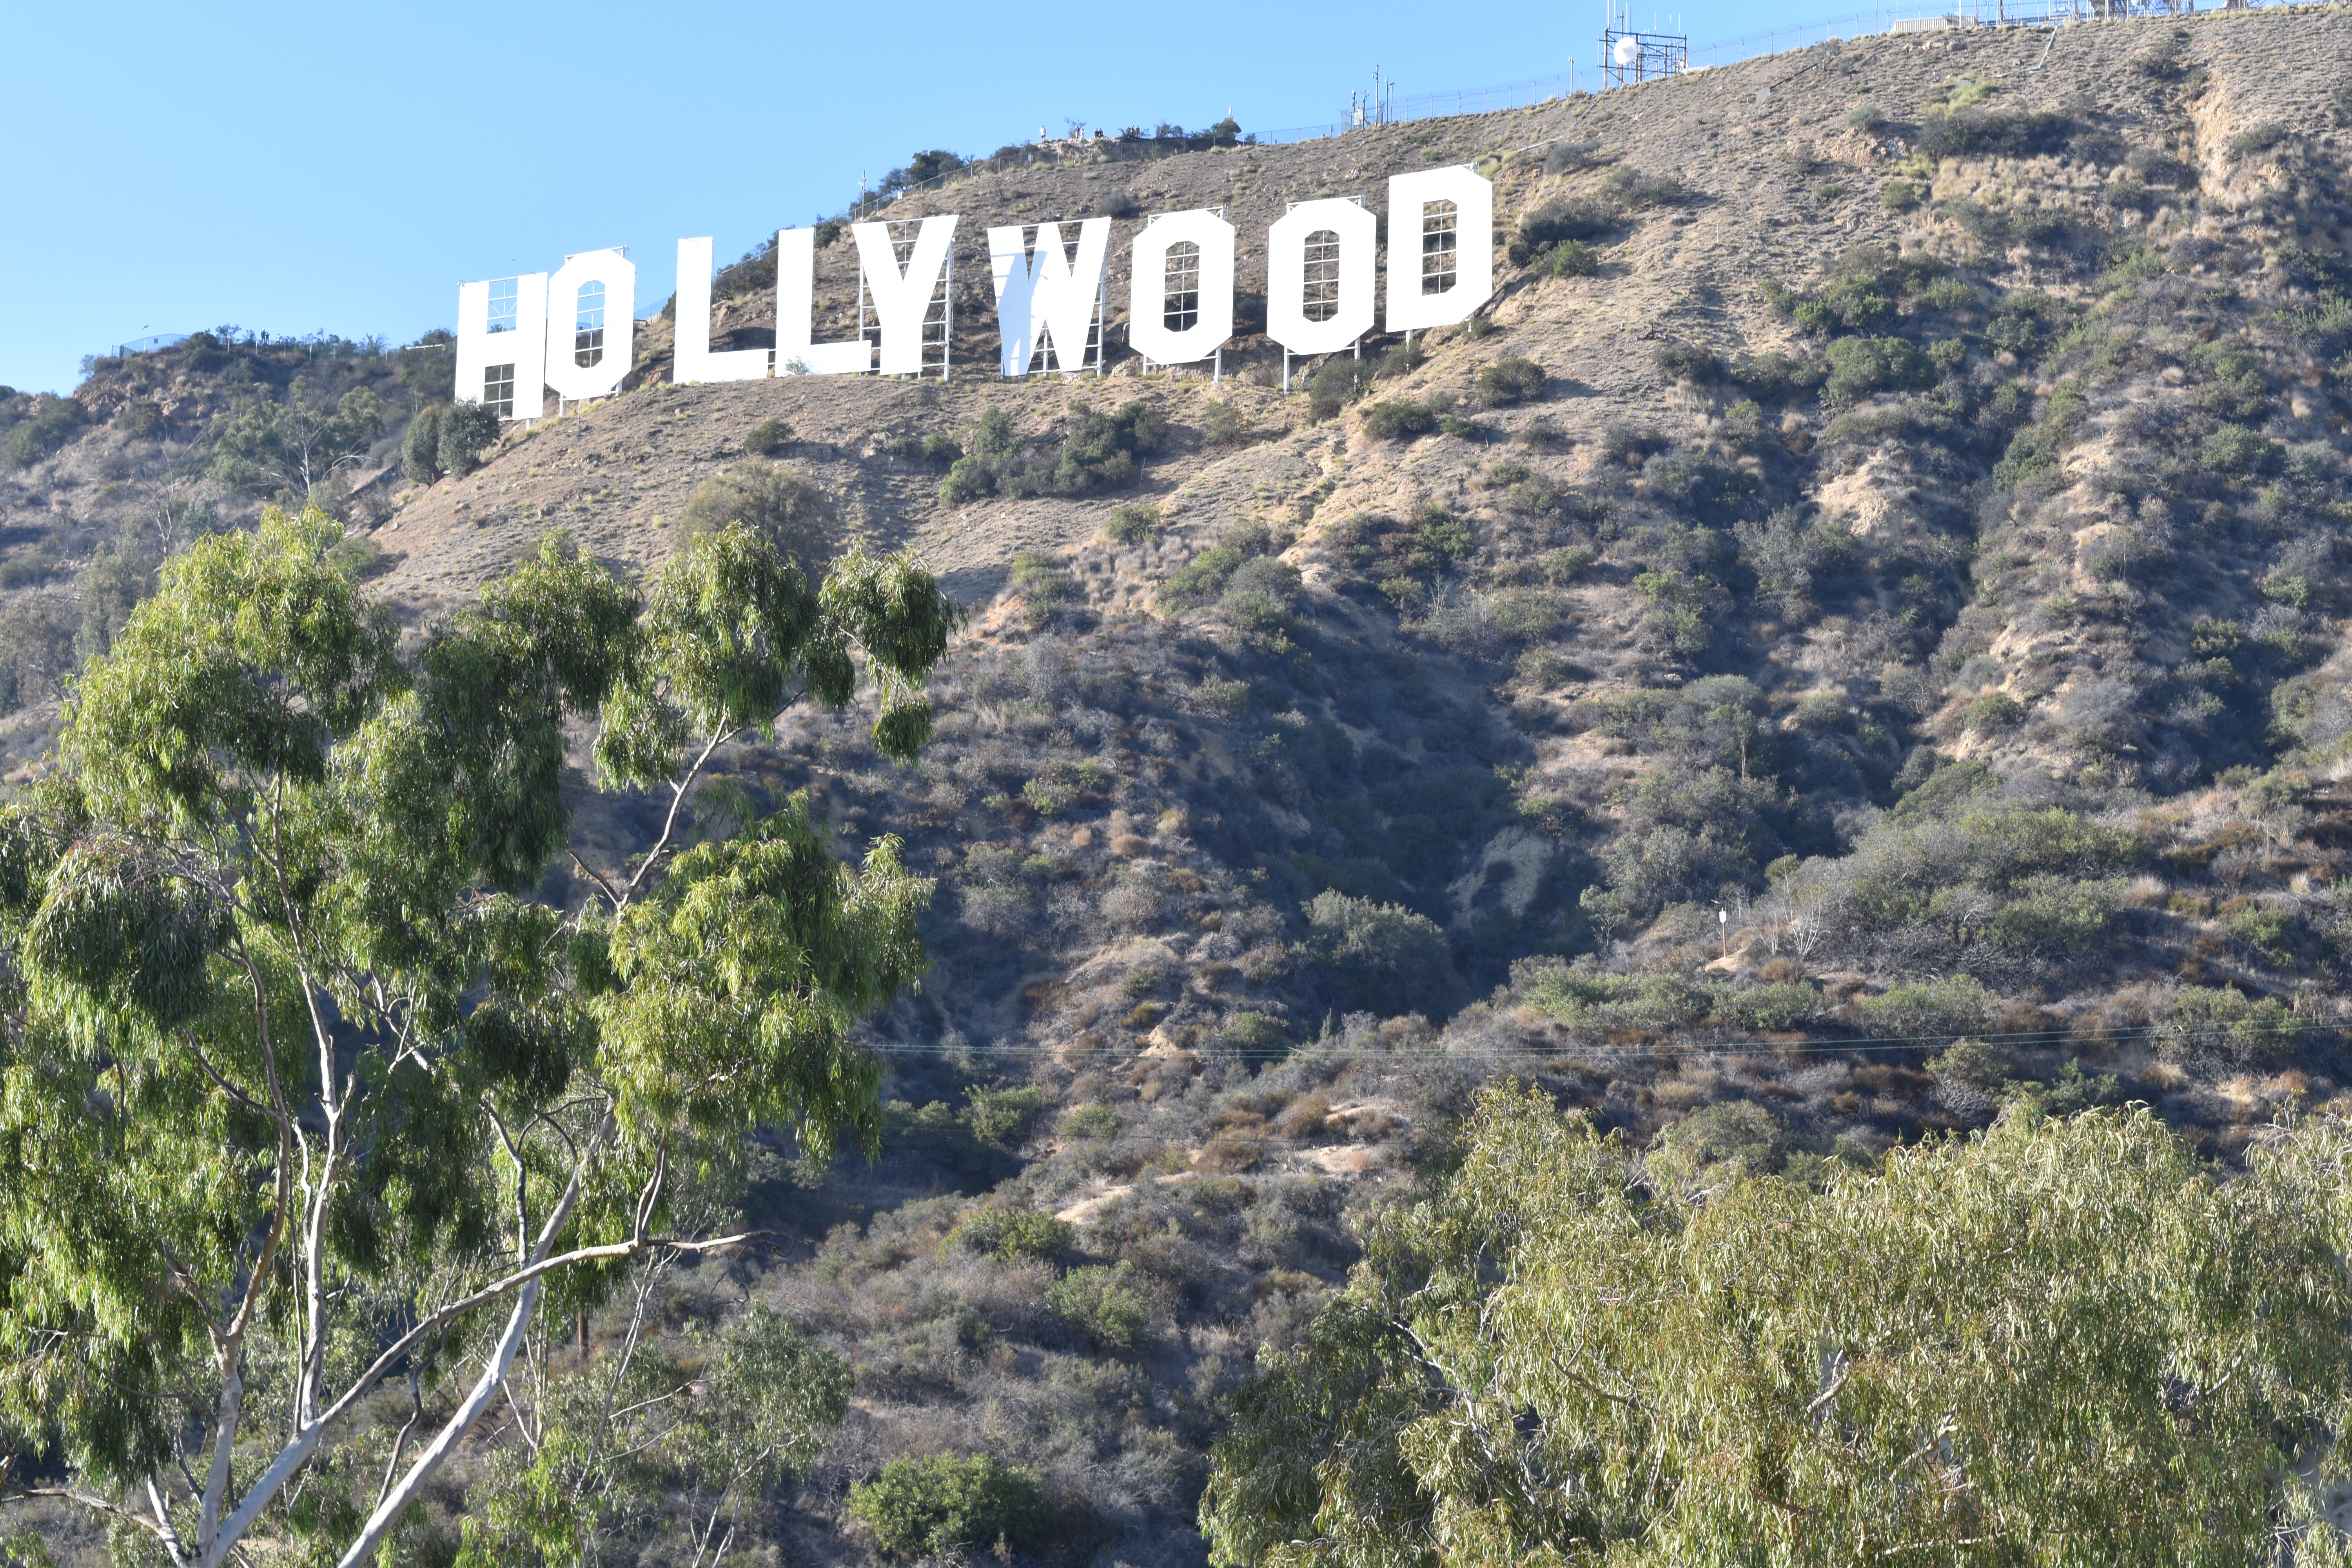 Hollywood Sign